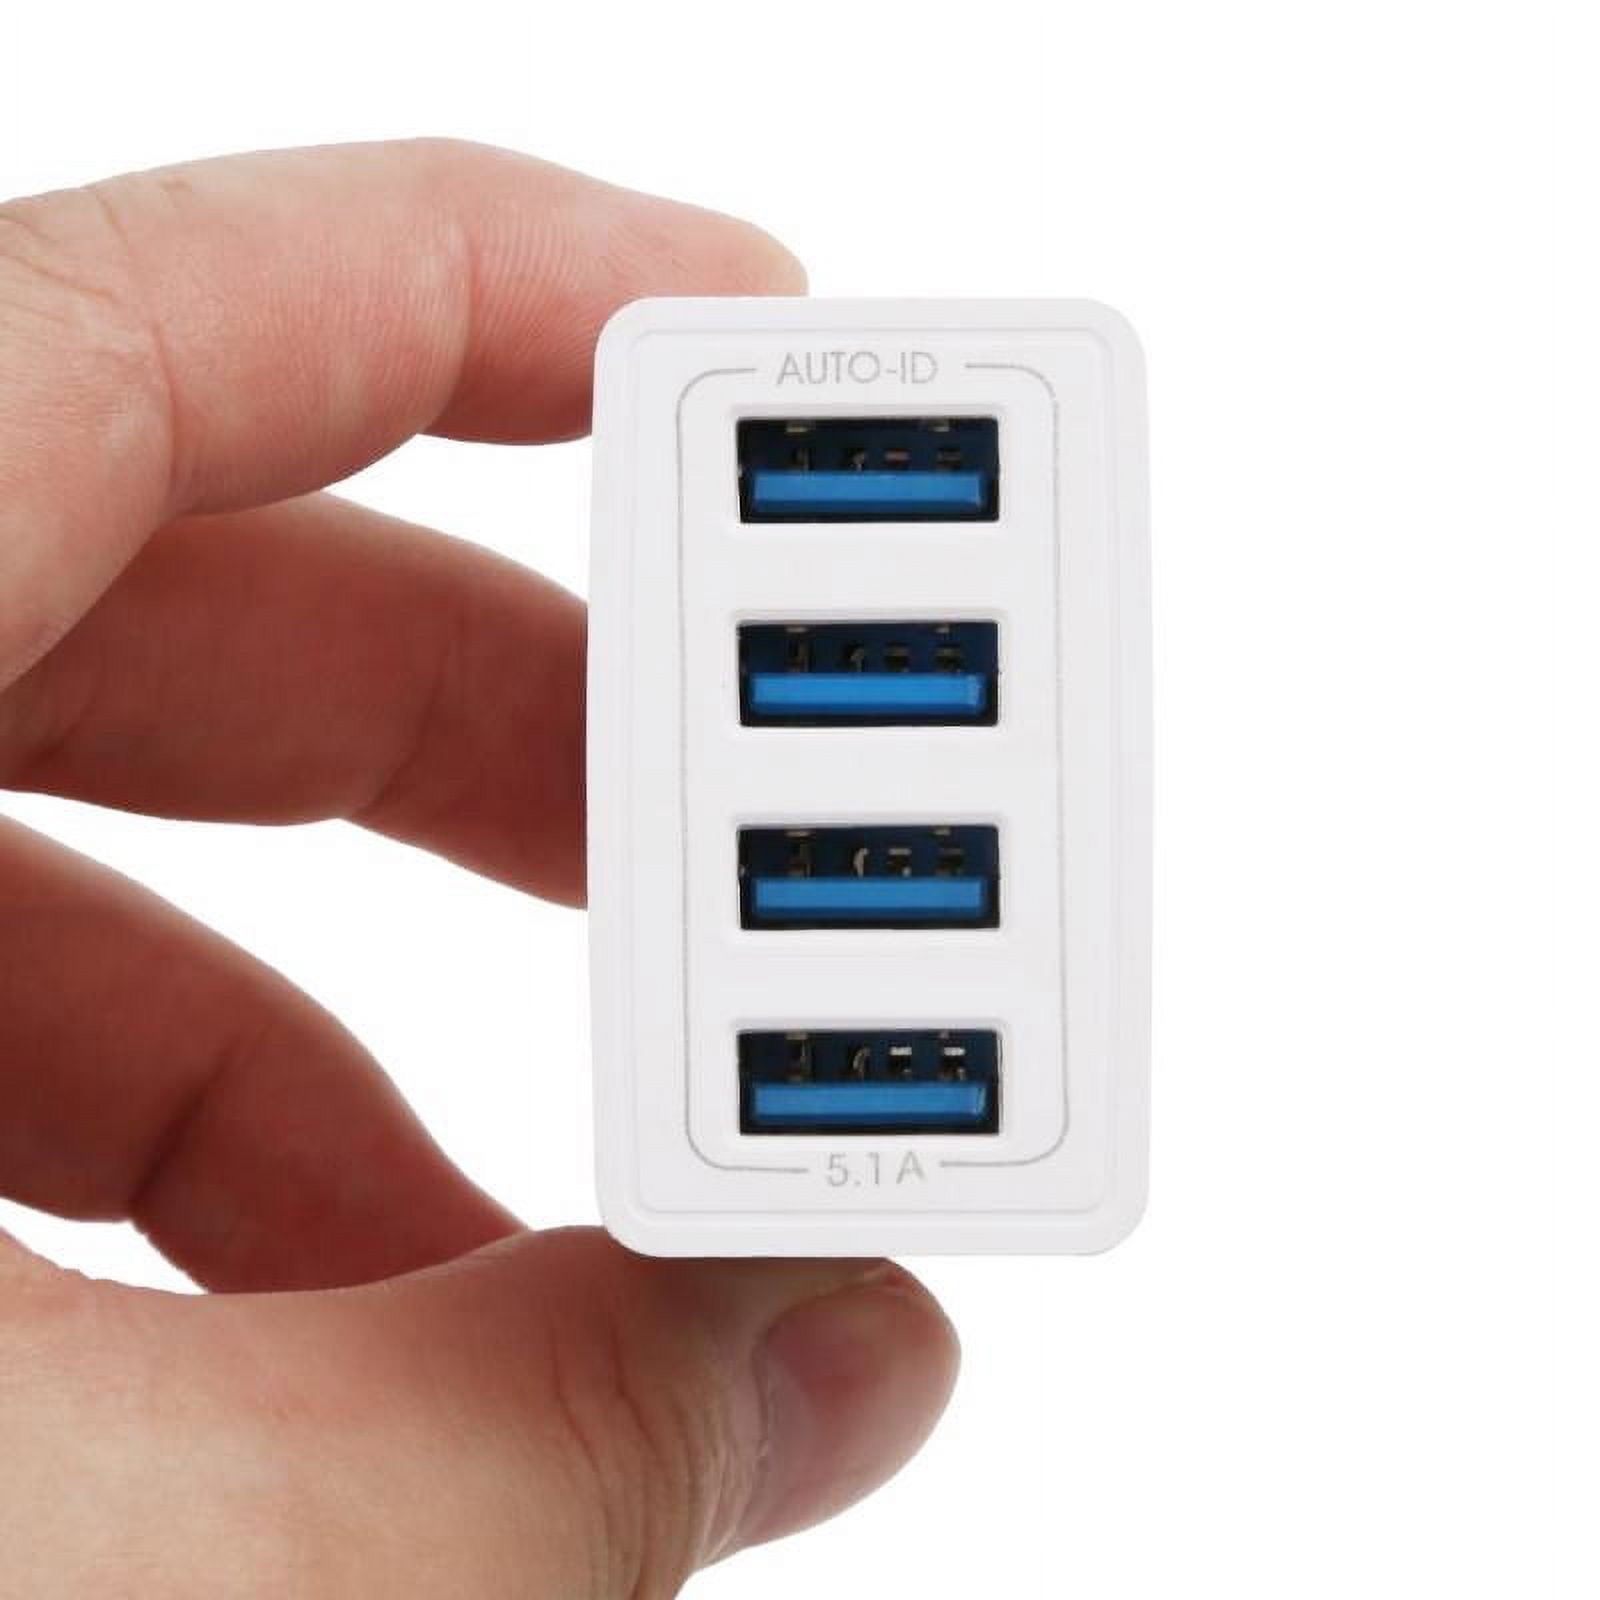 USB Wall Charger Adapter 1A/5V Travel Charger 4-ports USB Charging Block Brick Charger Power Adapter Cube Compatible with Phone Xs/XS Max/X/8/7/6 Plus 13 12 11 Pro Max Mini Universal - image 2 of 3